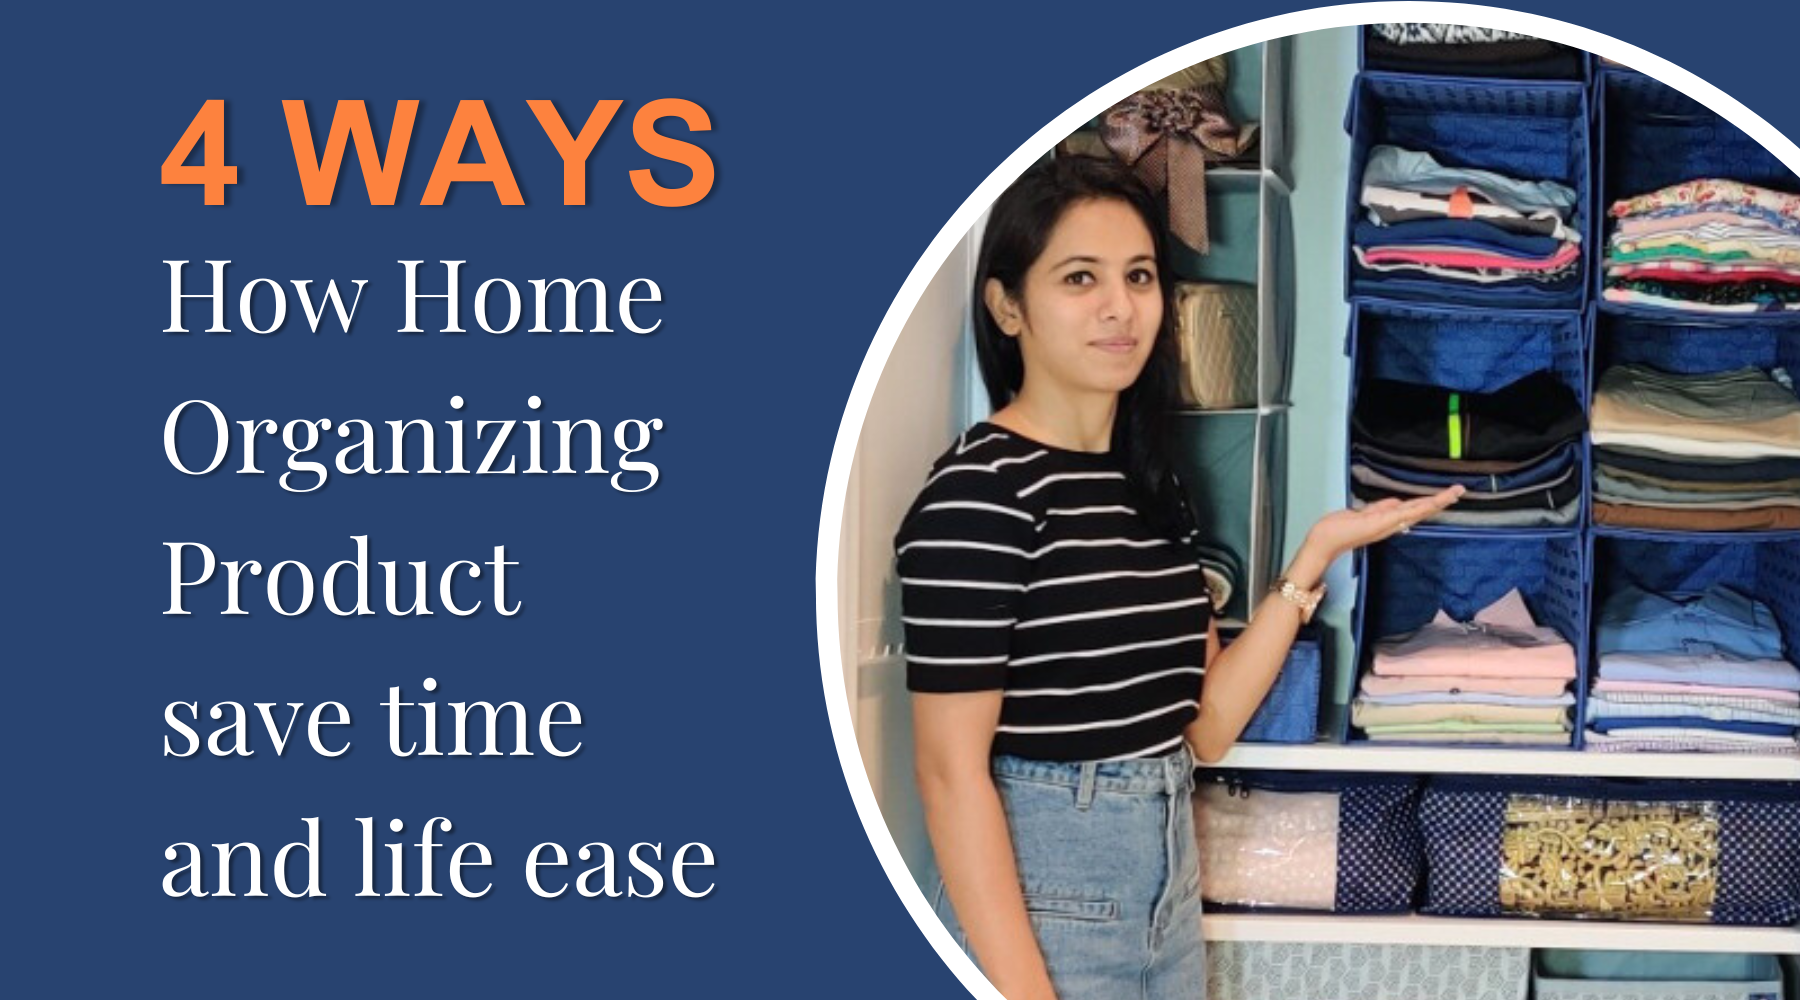 4 WAYS HOW HOME ORGANIZING PRODUCTS SAVE TIME AND MAKE LIFE EASY